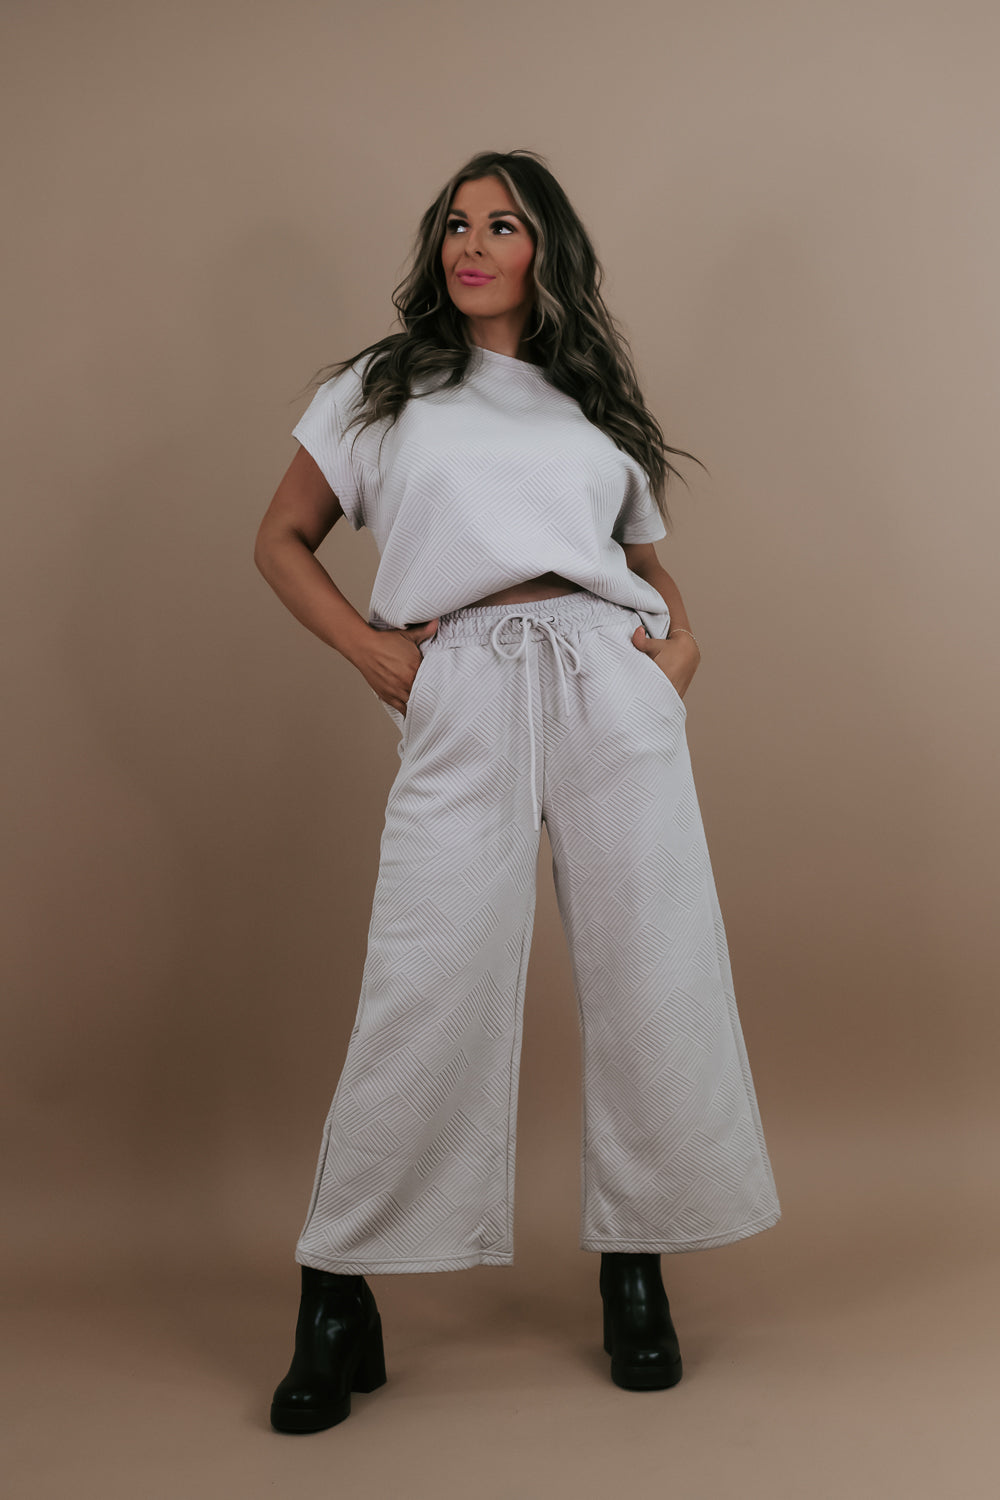 Happy Friday! 🤍 Still loving styling these linen wide leg pants